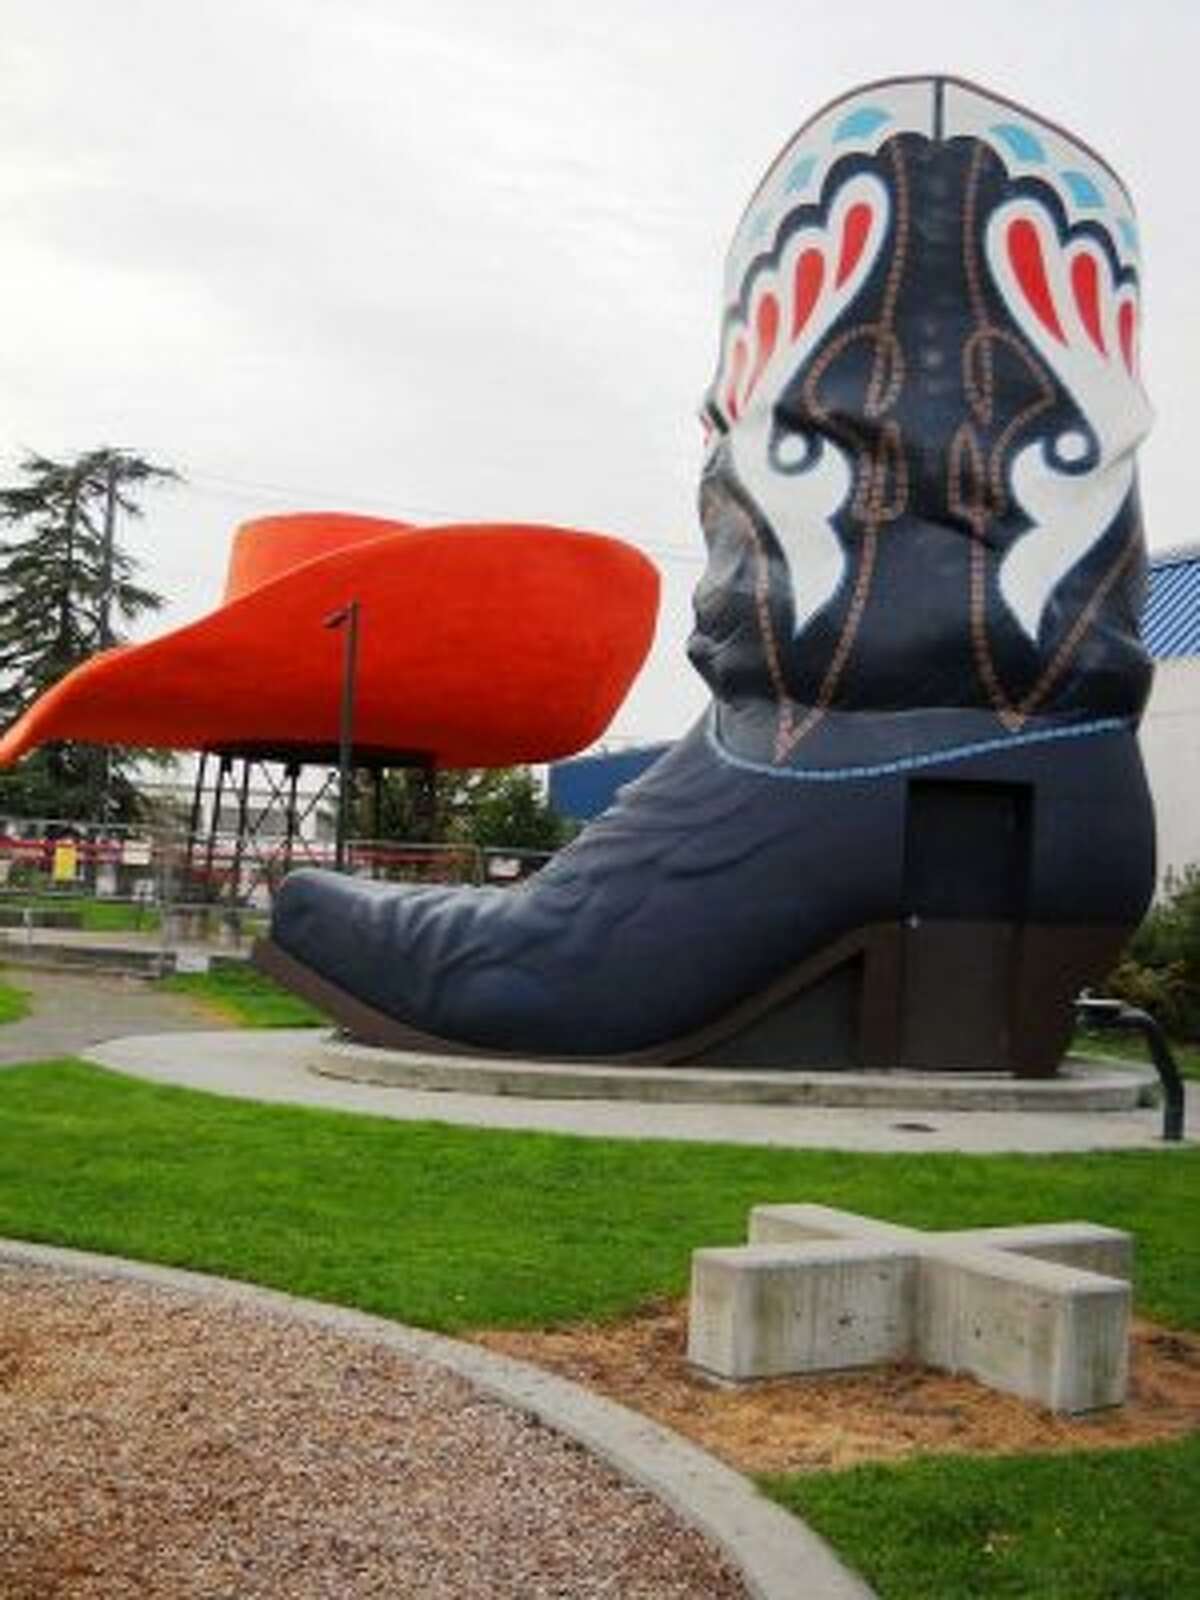 Georgetown's Oxbow Park, pictured after the Hat 'n' Boots were fully restorated in 2010.